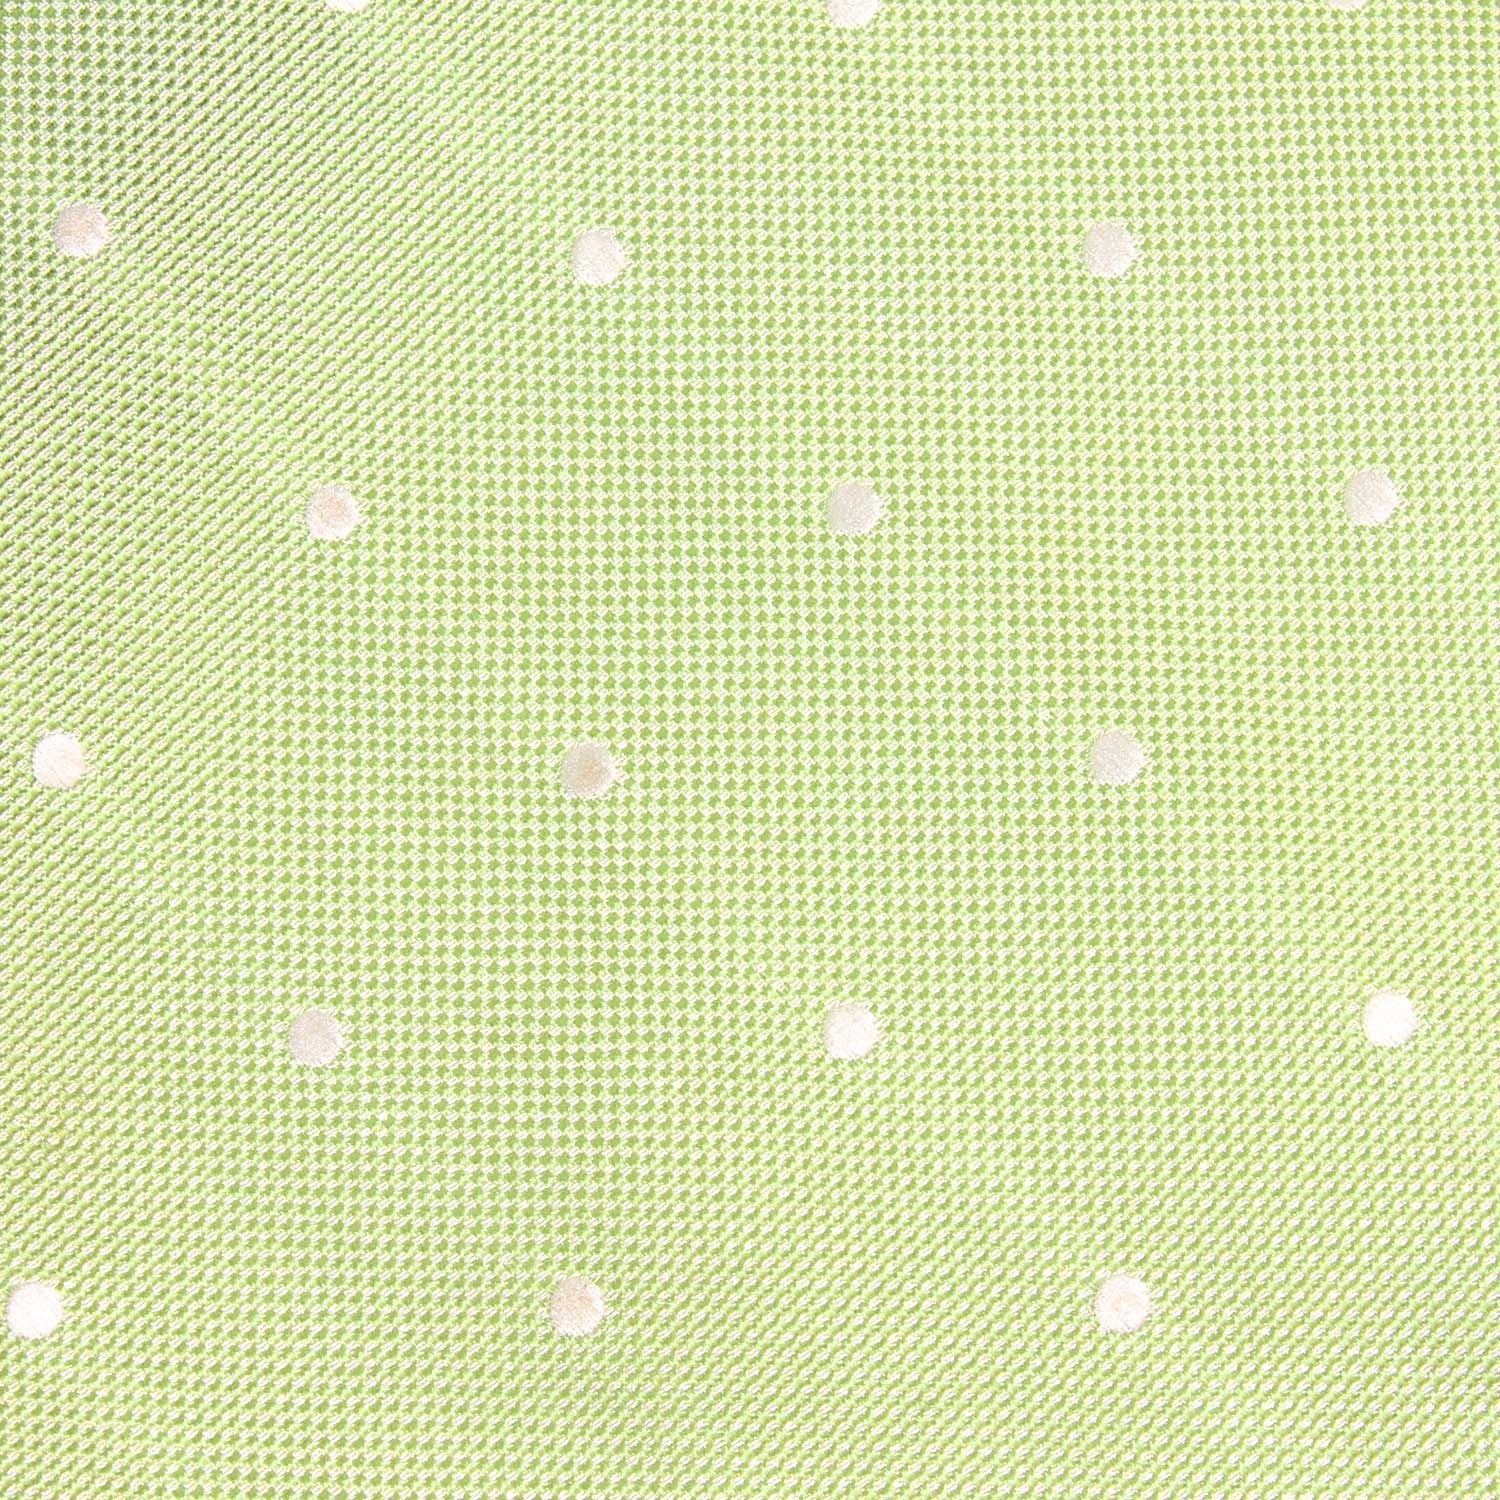 Light Mint Pistachio Green with White Polka Dots Fabric Pocket Square X239